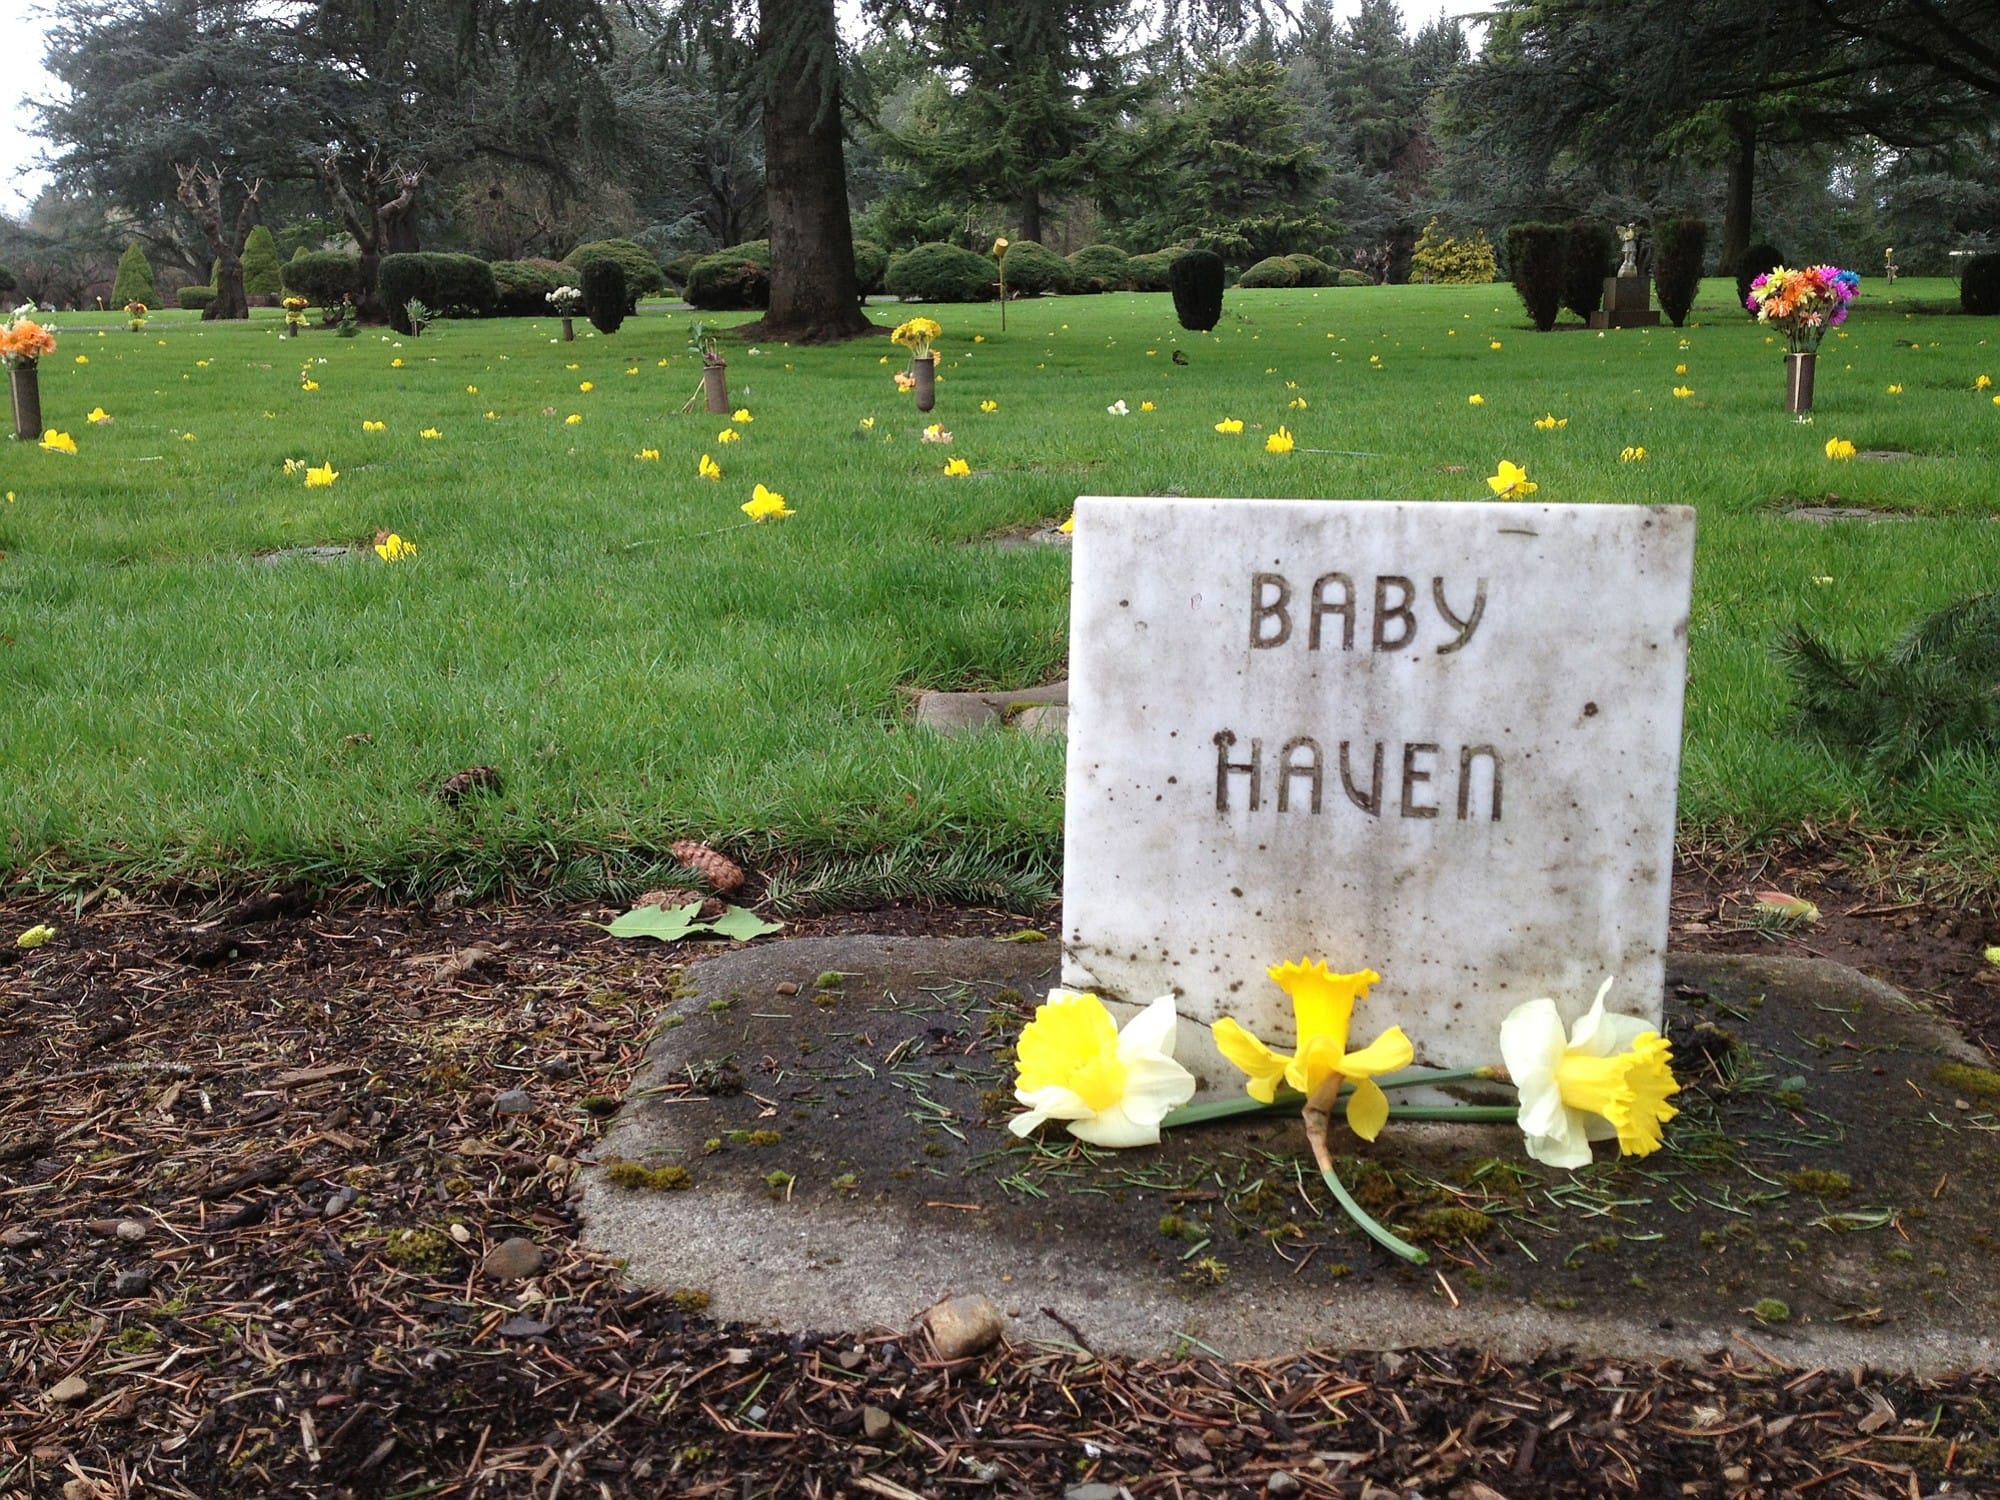 Courtesy of Teresa Wentworth
Teresa Wentworth and a group of family and friends have bring daffodils each year to Evergreen Memorial Gardens Cemetery in Vancouver. They place a flower at as many graves as possible, starting with the cemetery's Baby Haven.